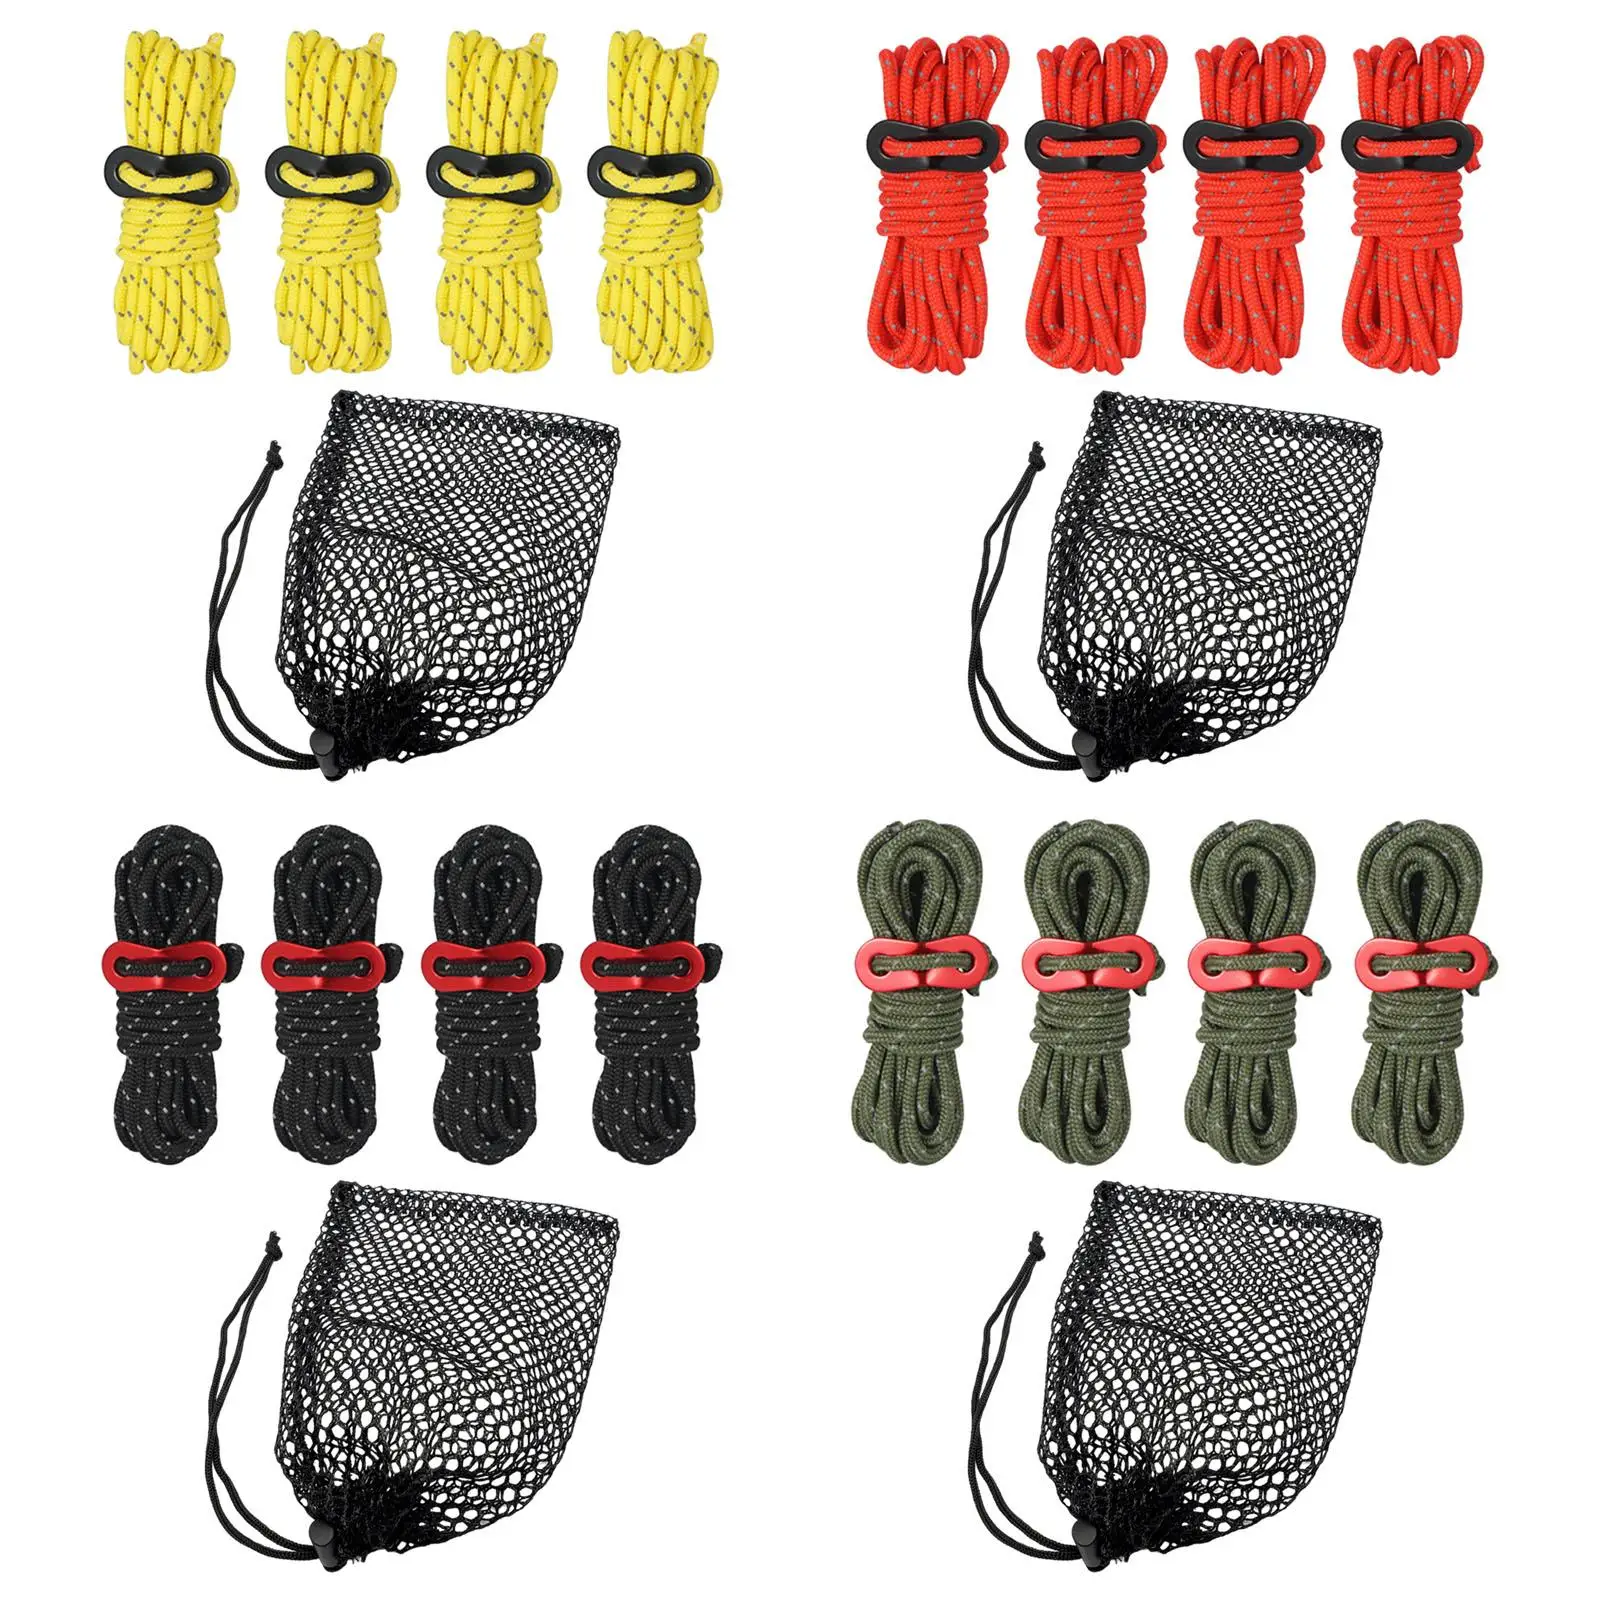 Lightweight High Tensile Reflective Tent Rope with Lanyard to Tie Down Tarps, Camping Tent, Outer Packing